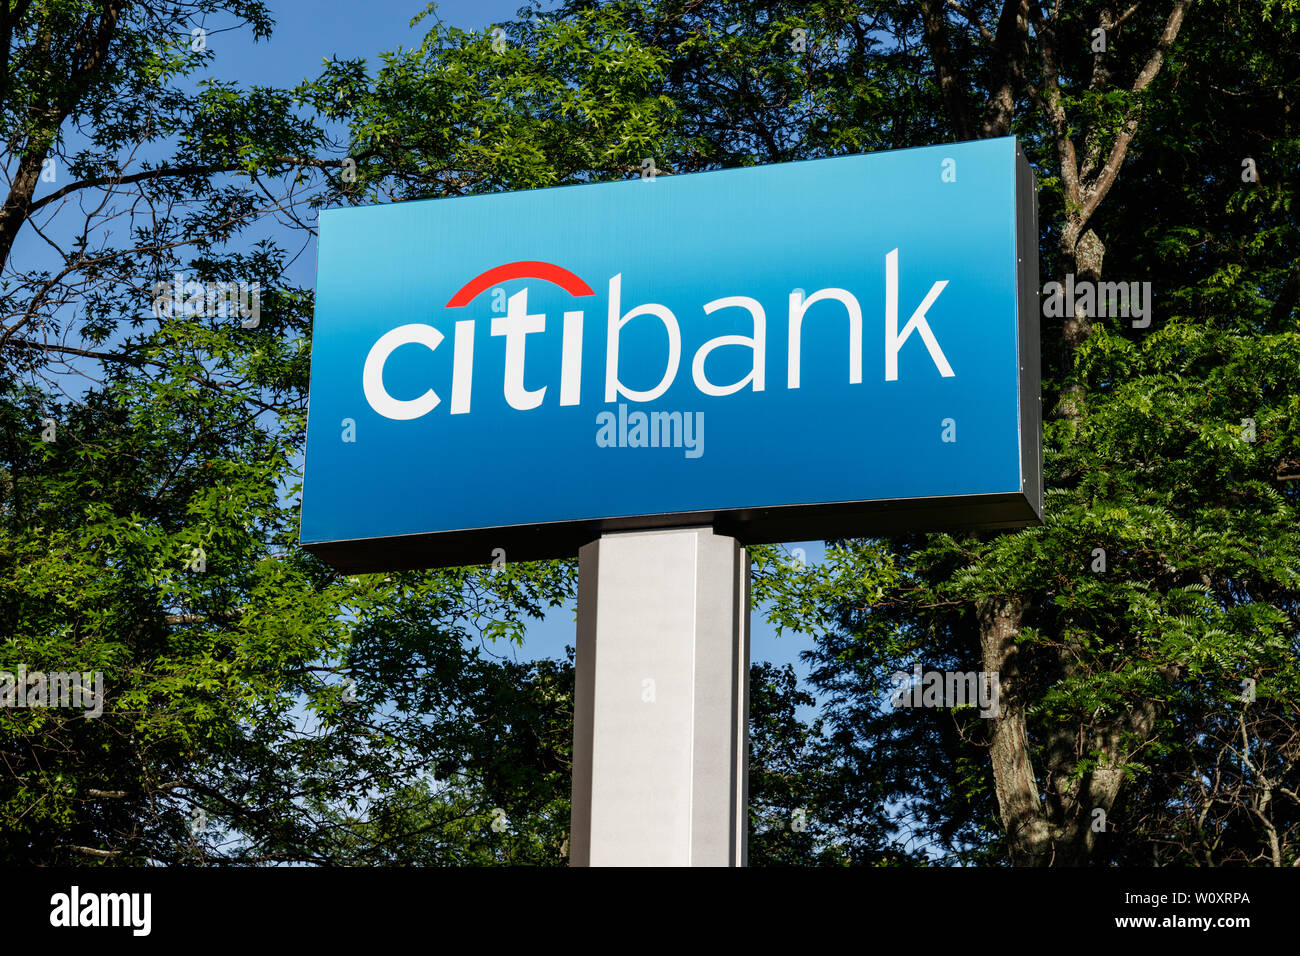 Deerfield - Circa June 2019: Citibank retail bank branch. Citibank is the consumer division of financial services multinational Citigroup II Stock Photo